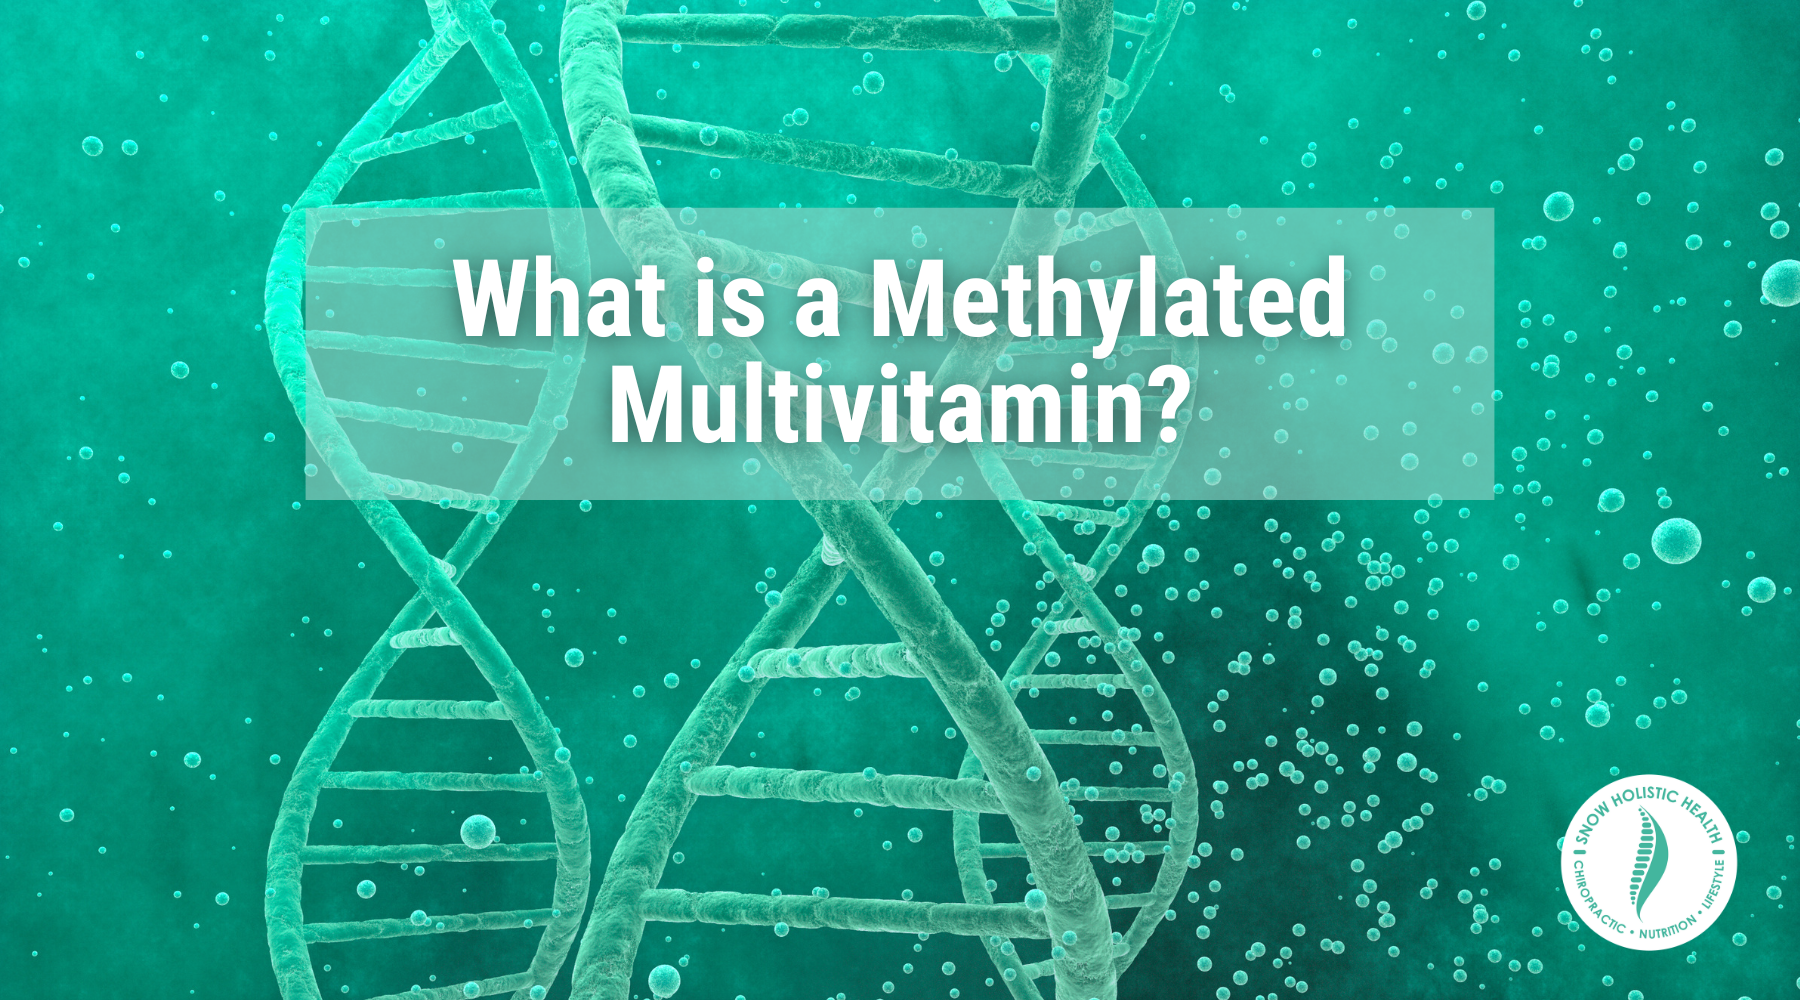 What is a Methylated Multiviatmin? Background image: dna strands